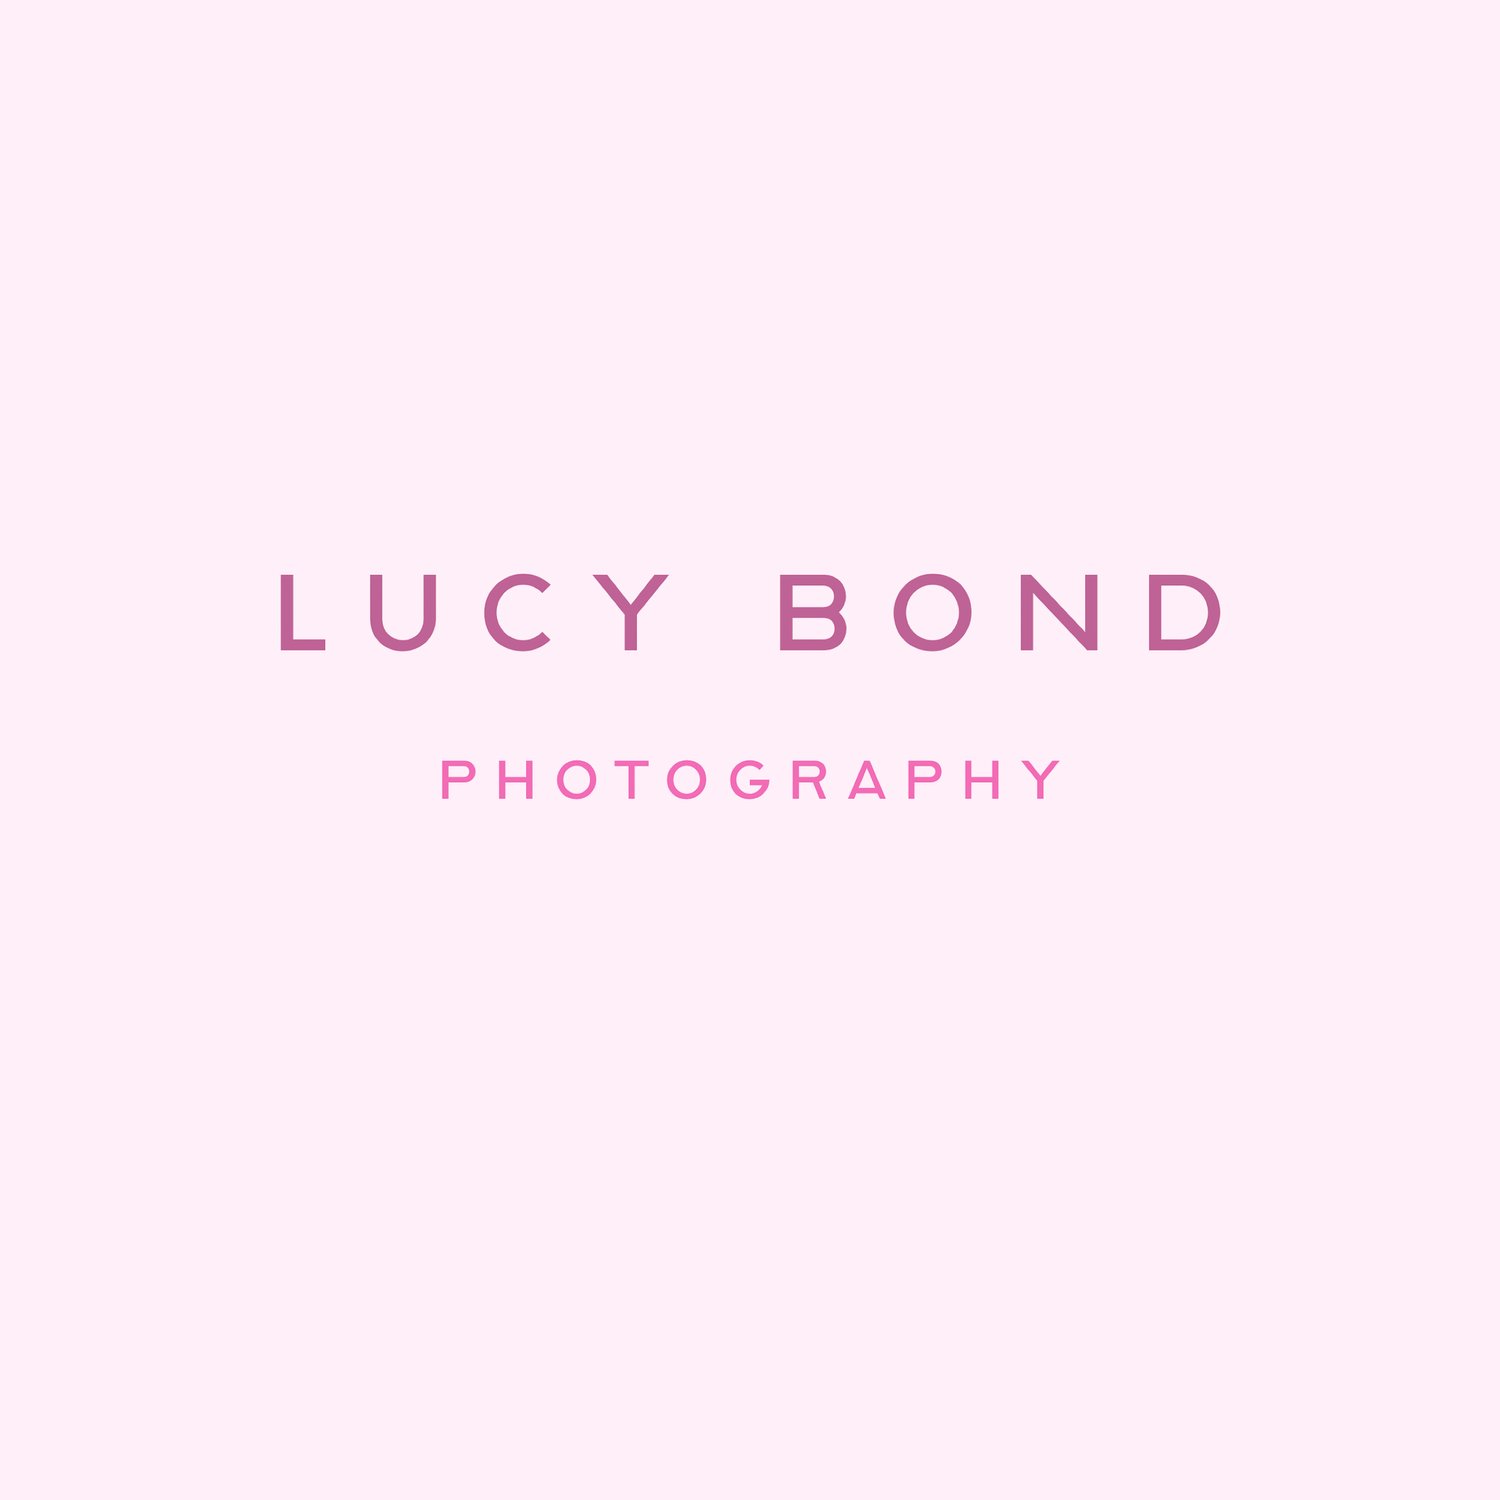 Lucy Bond Photography